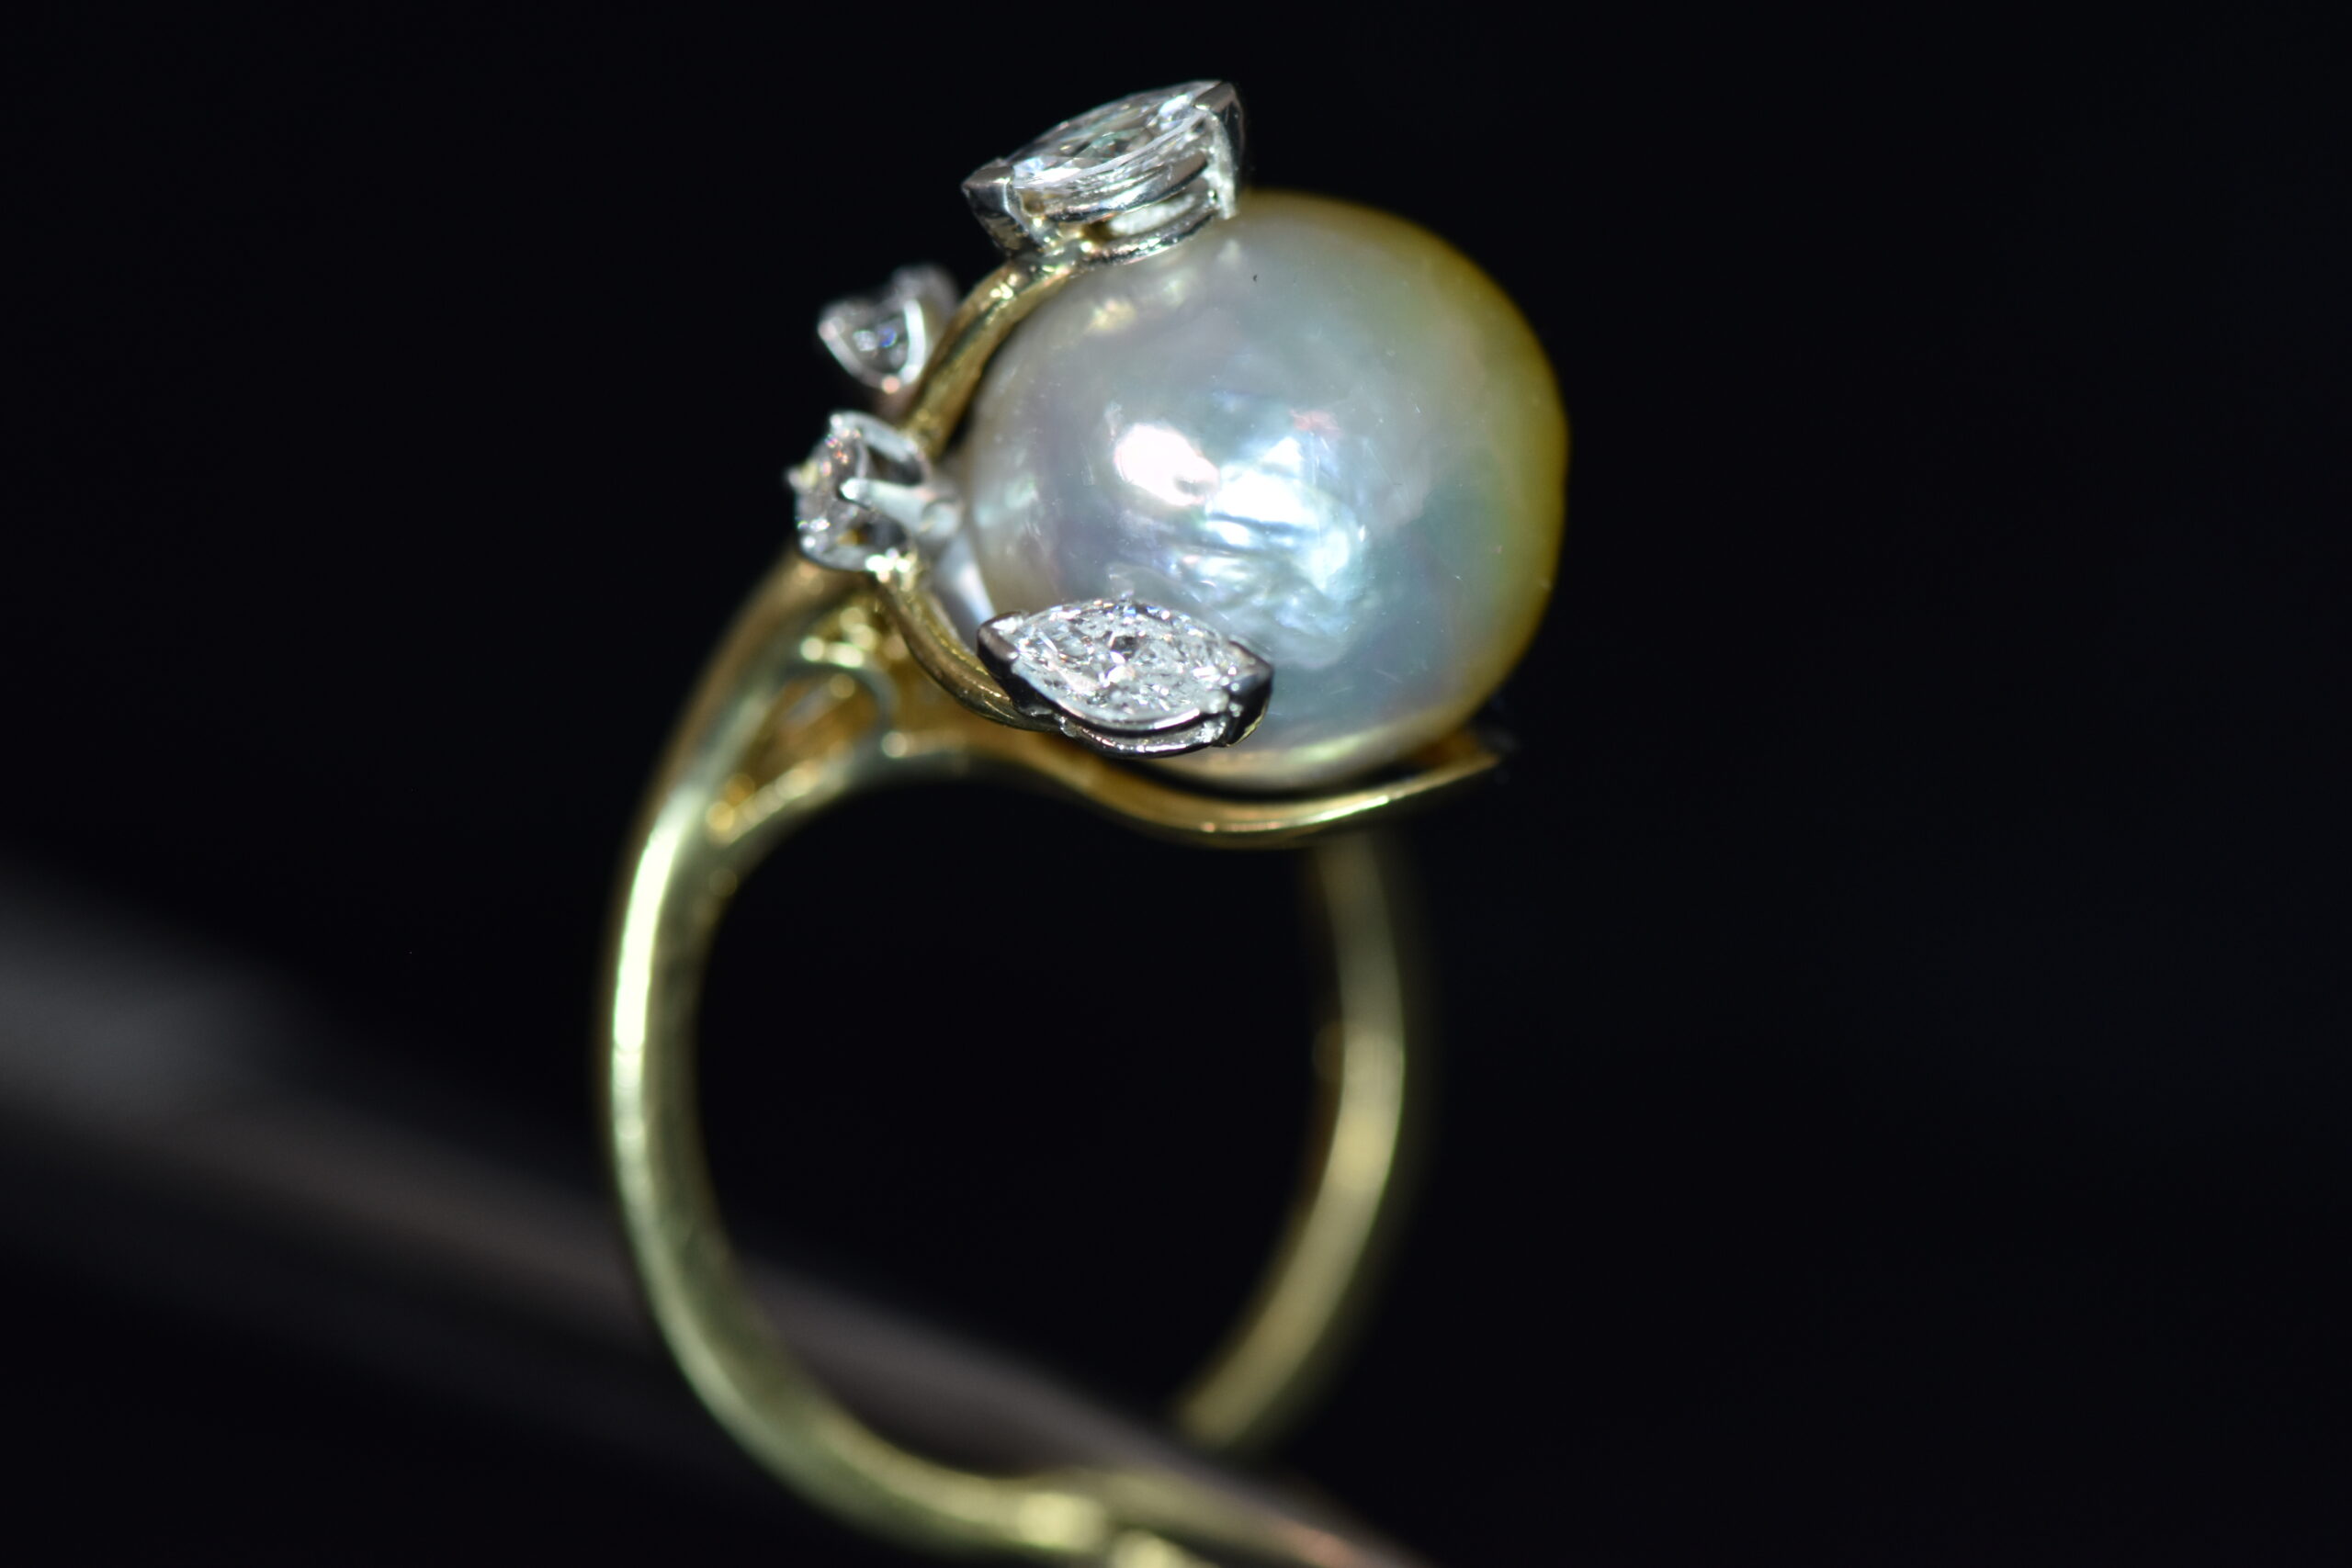 The Antique Victorian Era Emerald And Pearl Floral Ring | 890846 |  Sellingantiques.co.uk